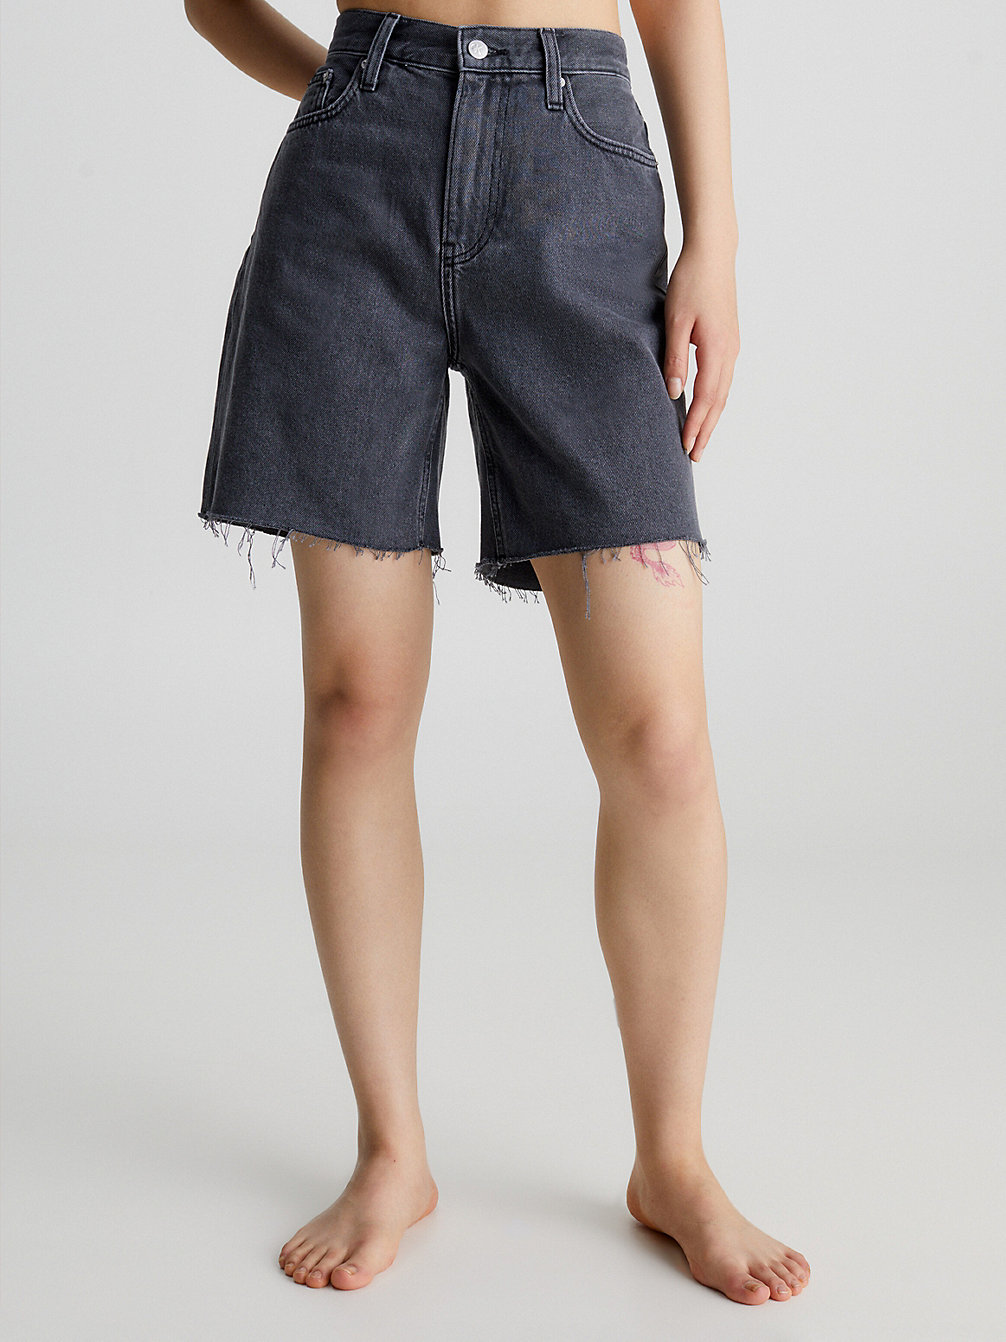 Pantaloncini Mom Bermuda In Jeans > WASHED BLACK DBL BELTED WB > undefined donna > Calvin Klein